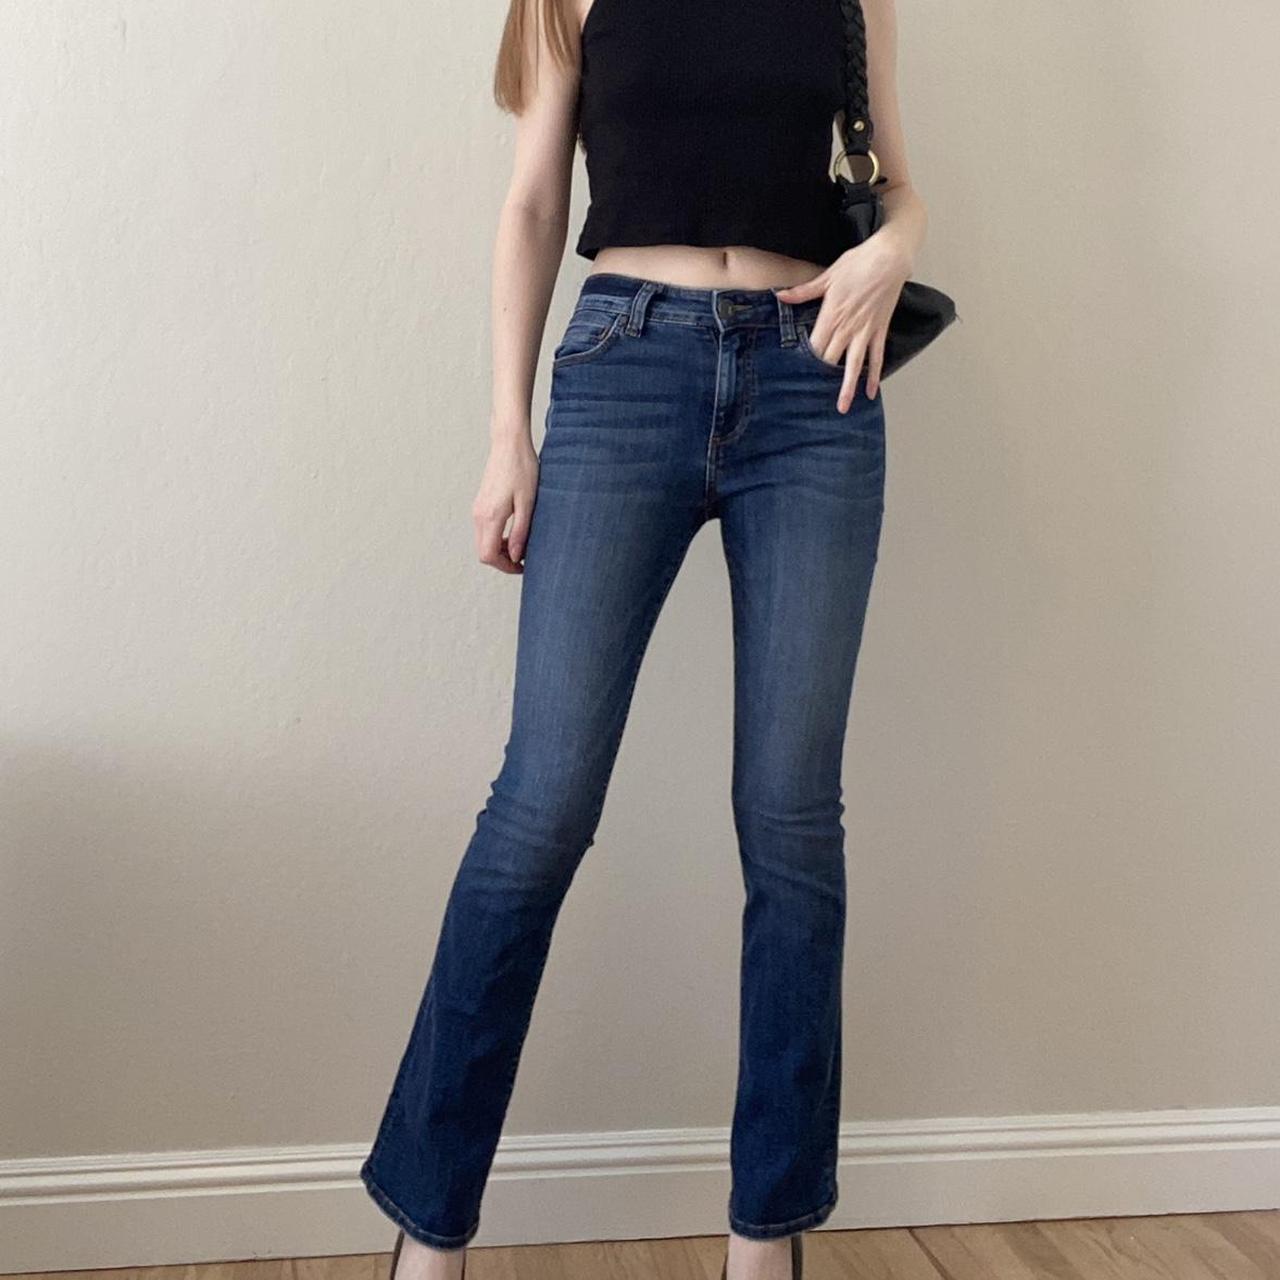 Kut from the Kloth Women's Jeans (2)